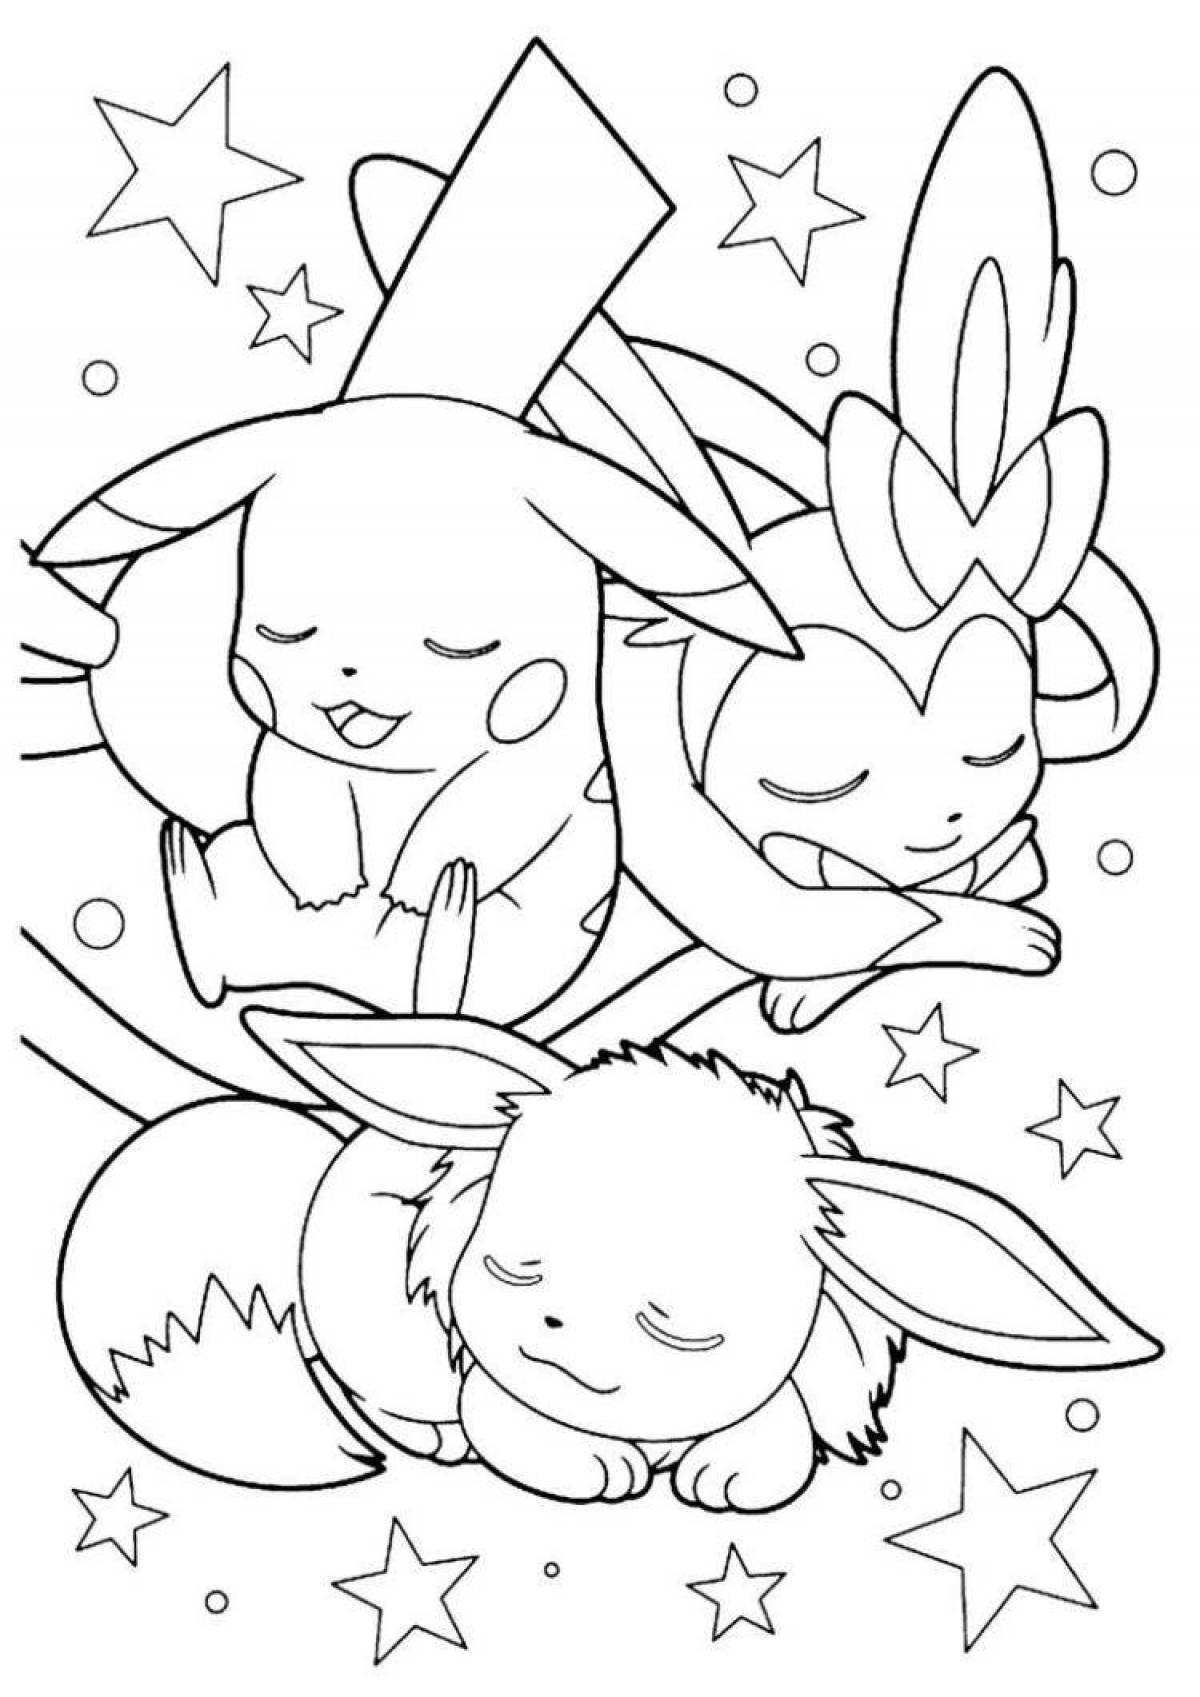 Evie and Pikachu fun coloring book